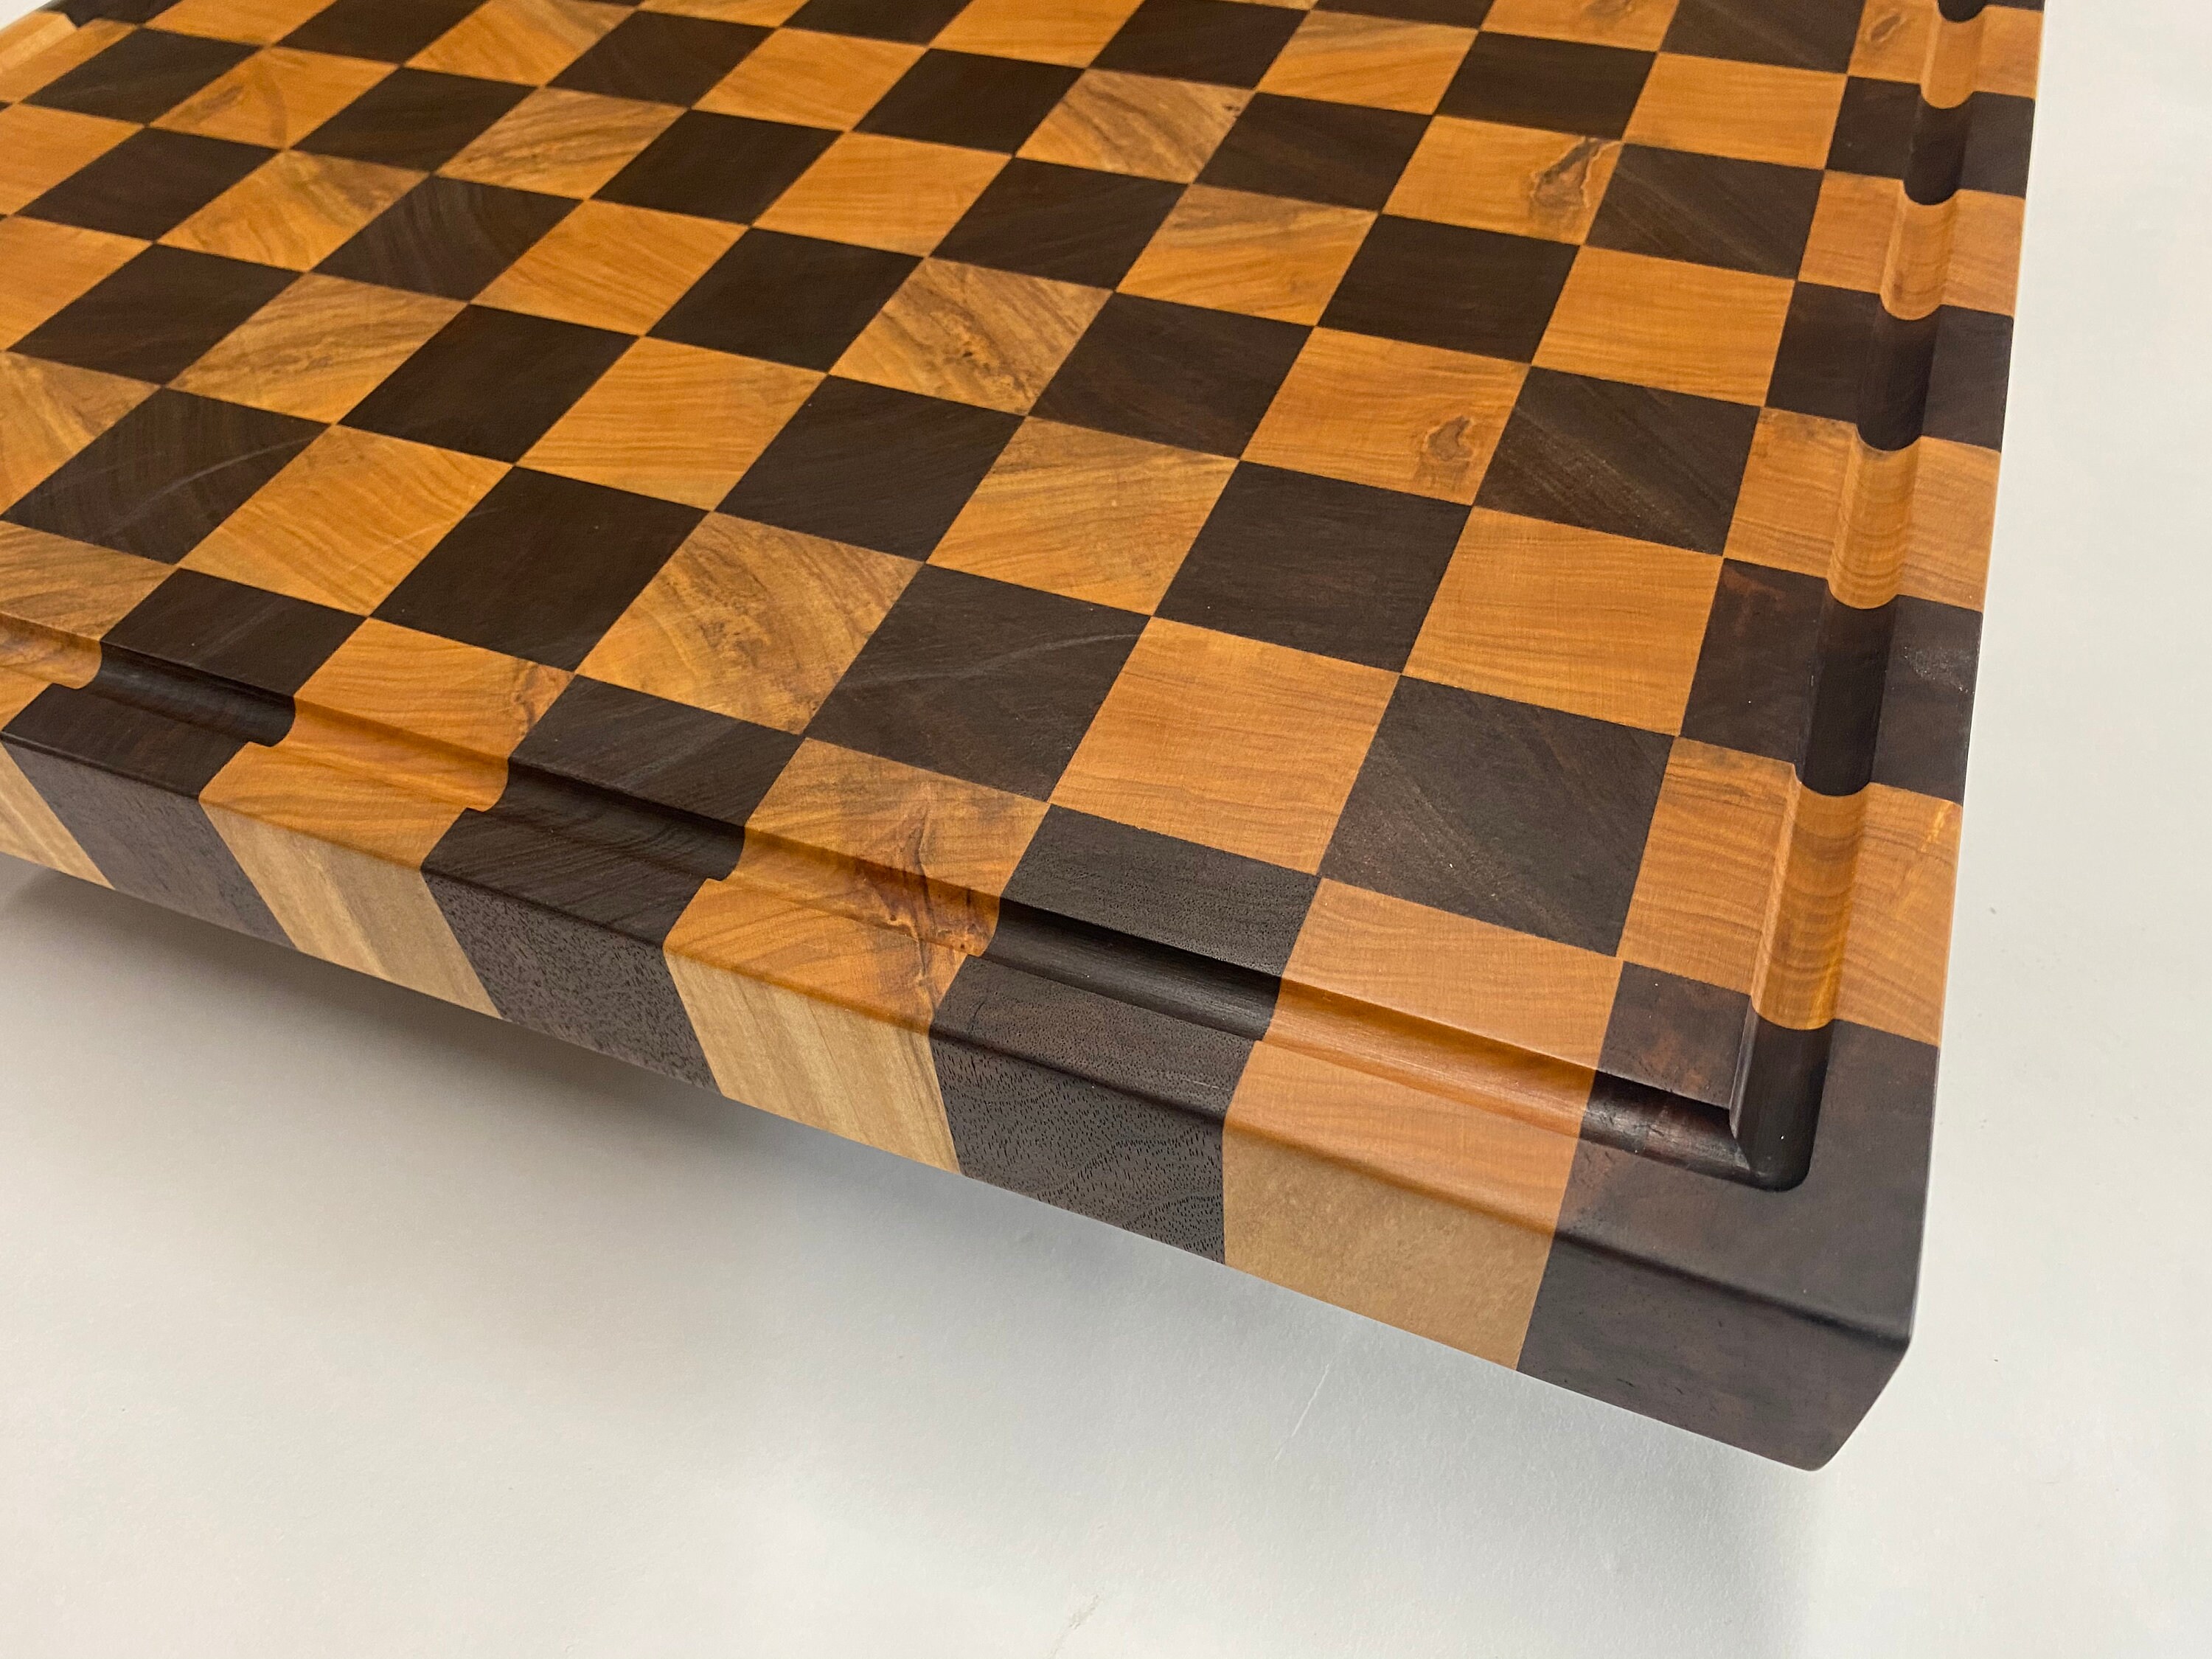 End Grain Checkered Pattern Cutting Board – Luxe Life Candle Company